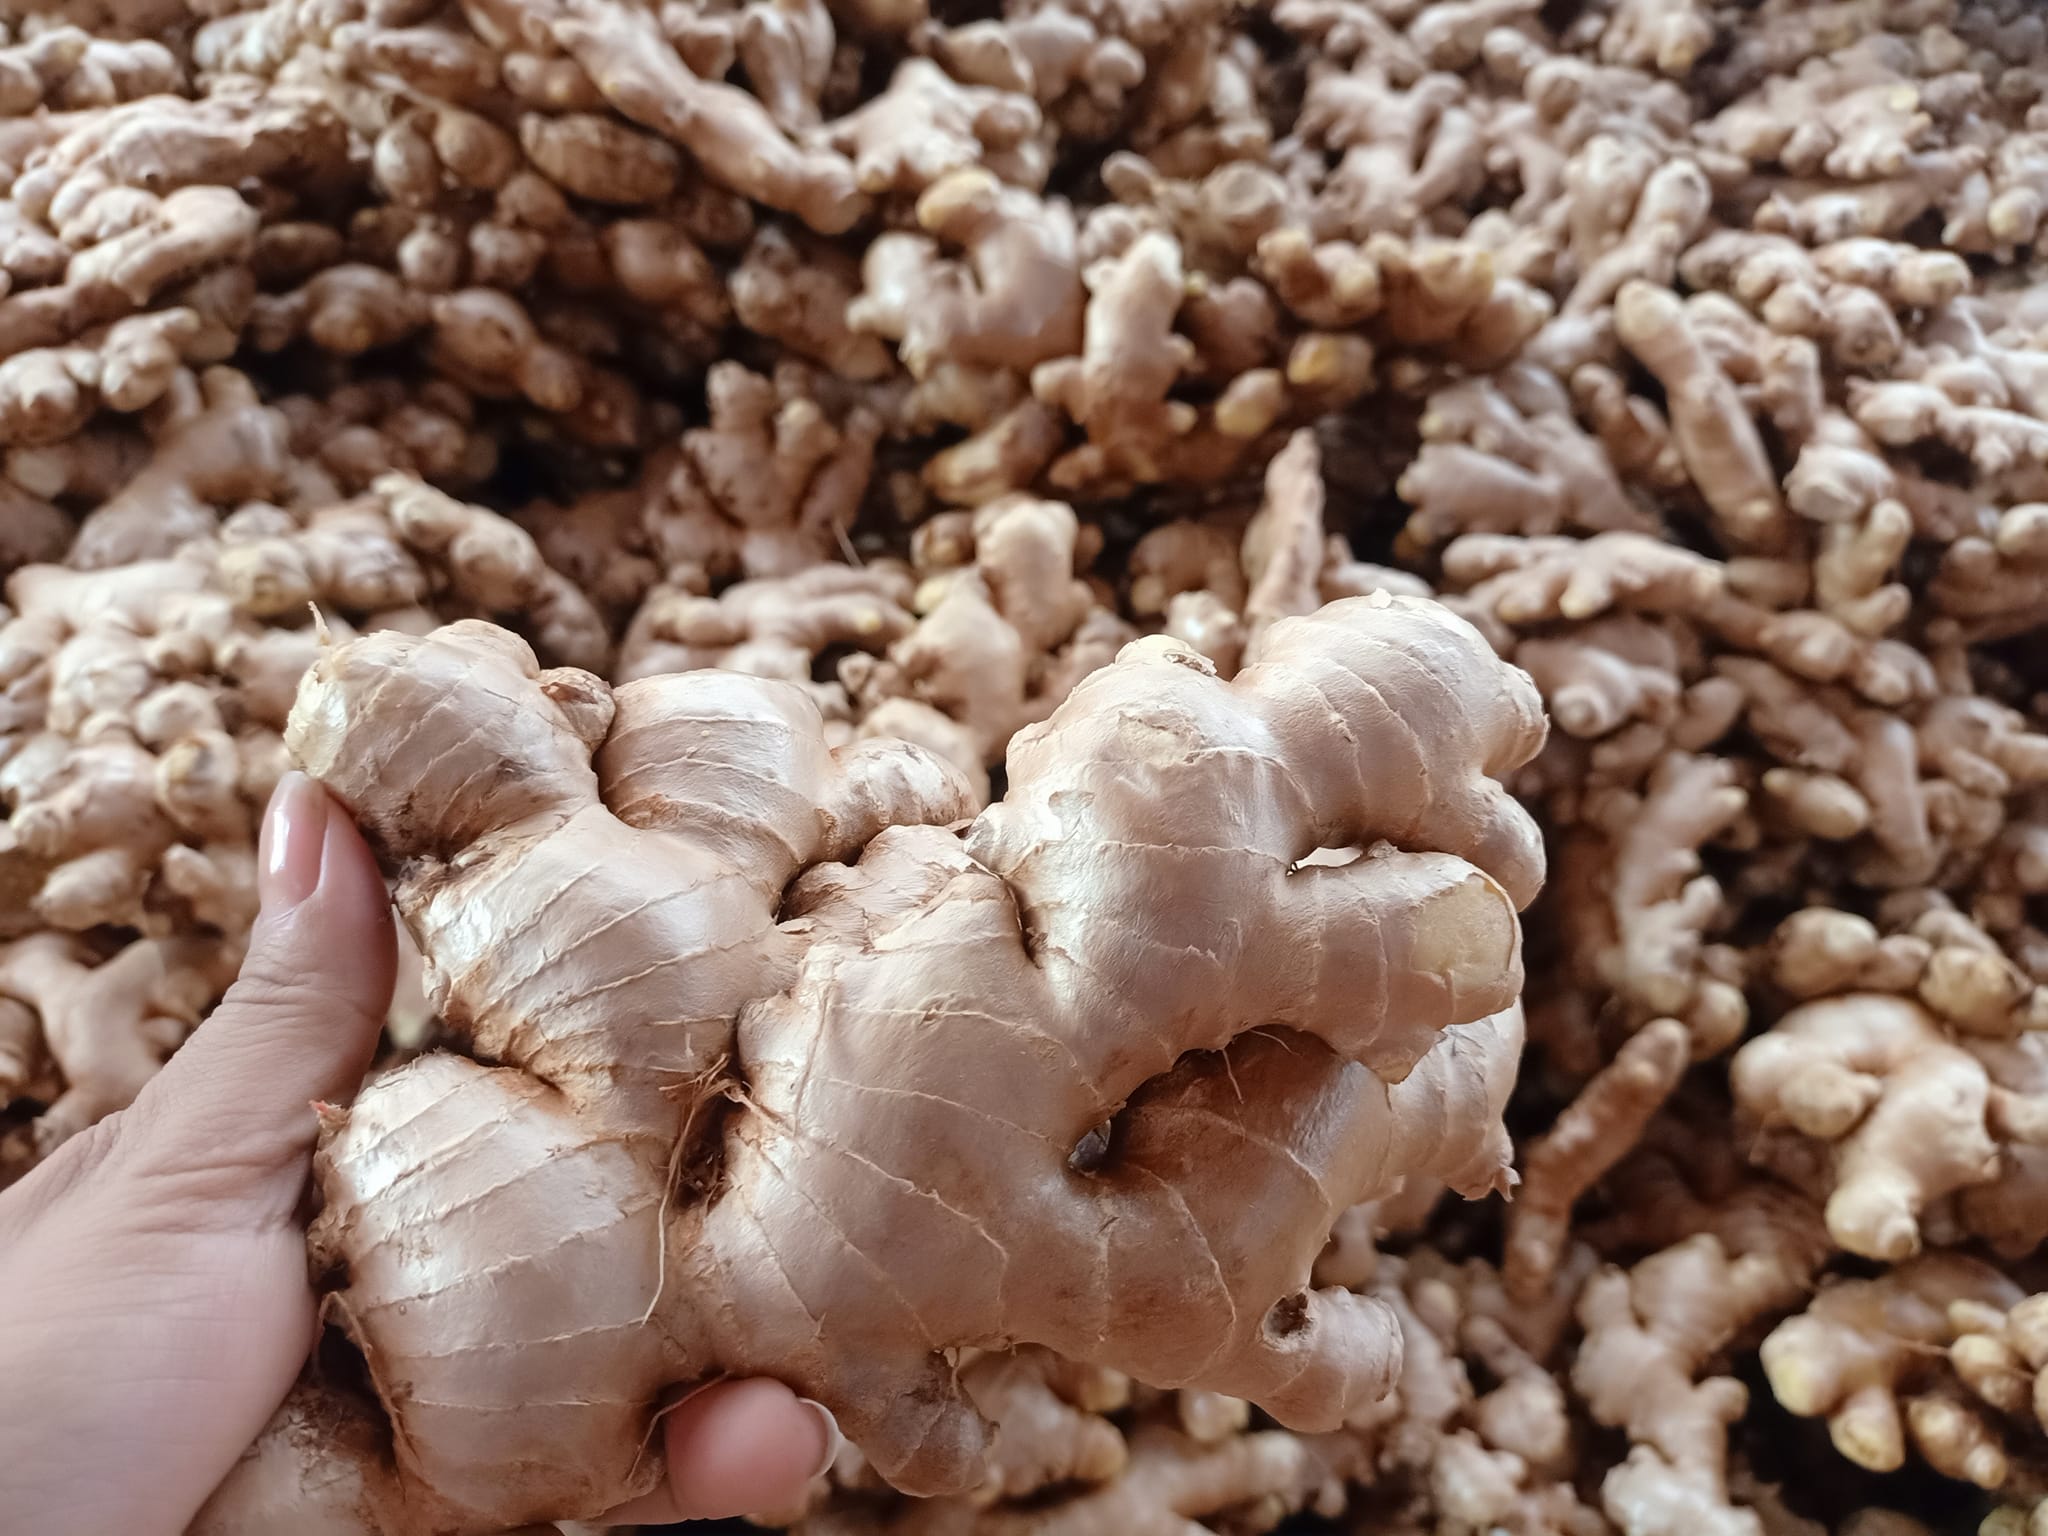 Tan Gia Thanh fresh ginger for export